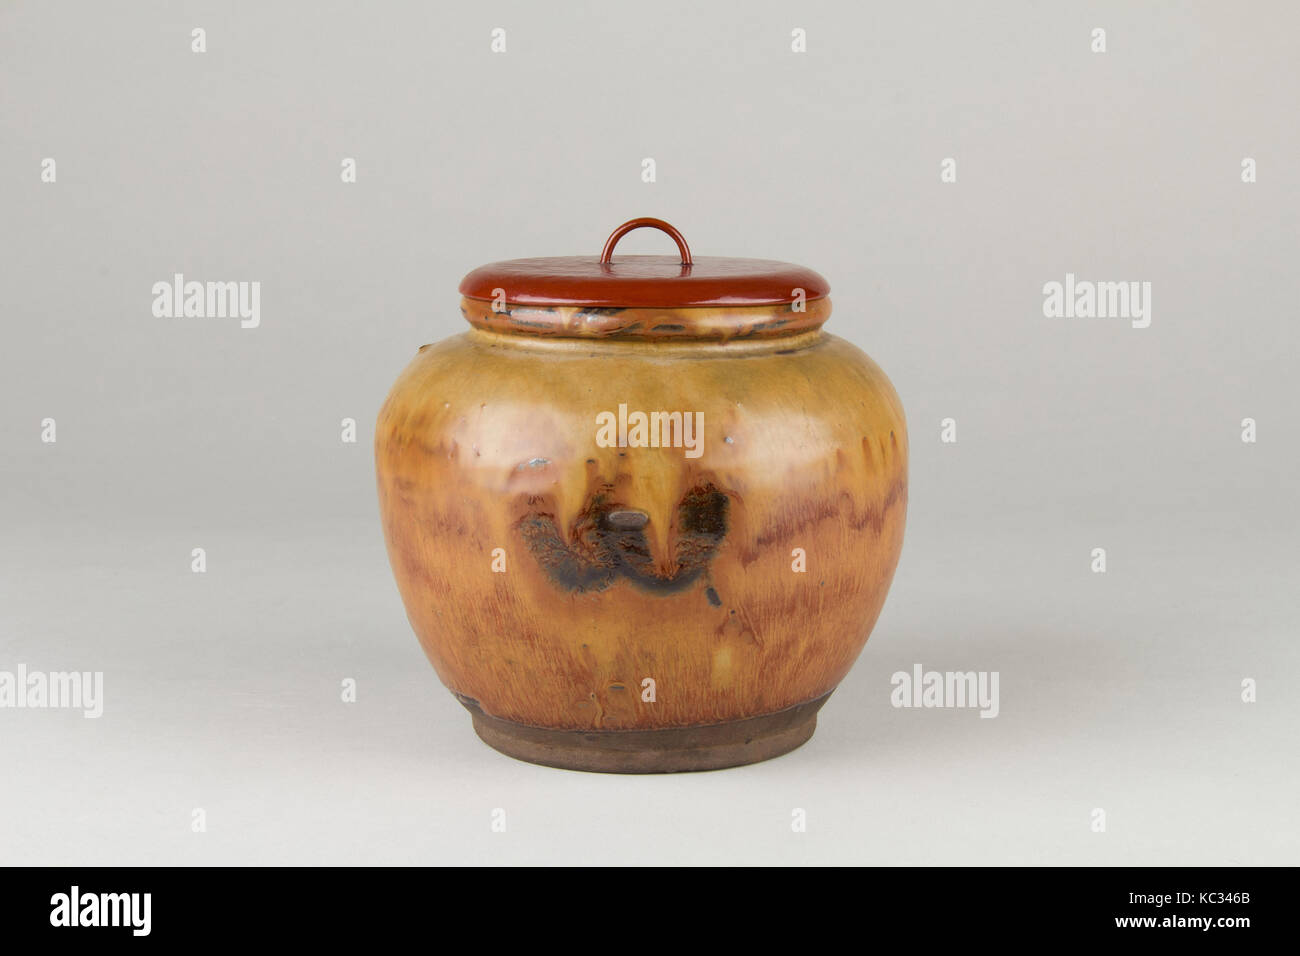 Jar with Cover, Song dynasty (960–1279), China, Pottery (Temmoku glaze), H. 5 in. (12.7 cm); Diam. 5 1/4 in. (13.3 cm), Ceramics Stock Photo